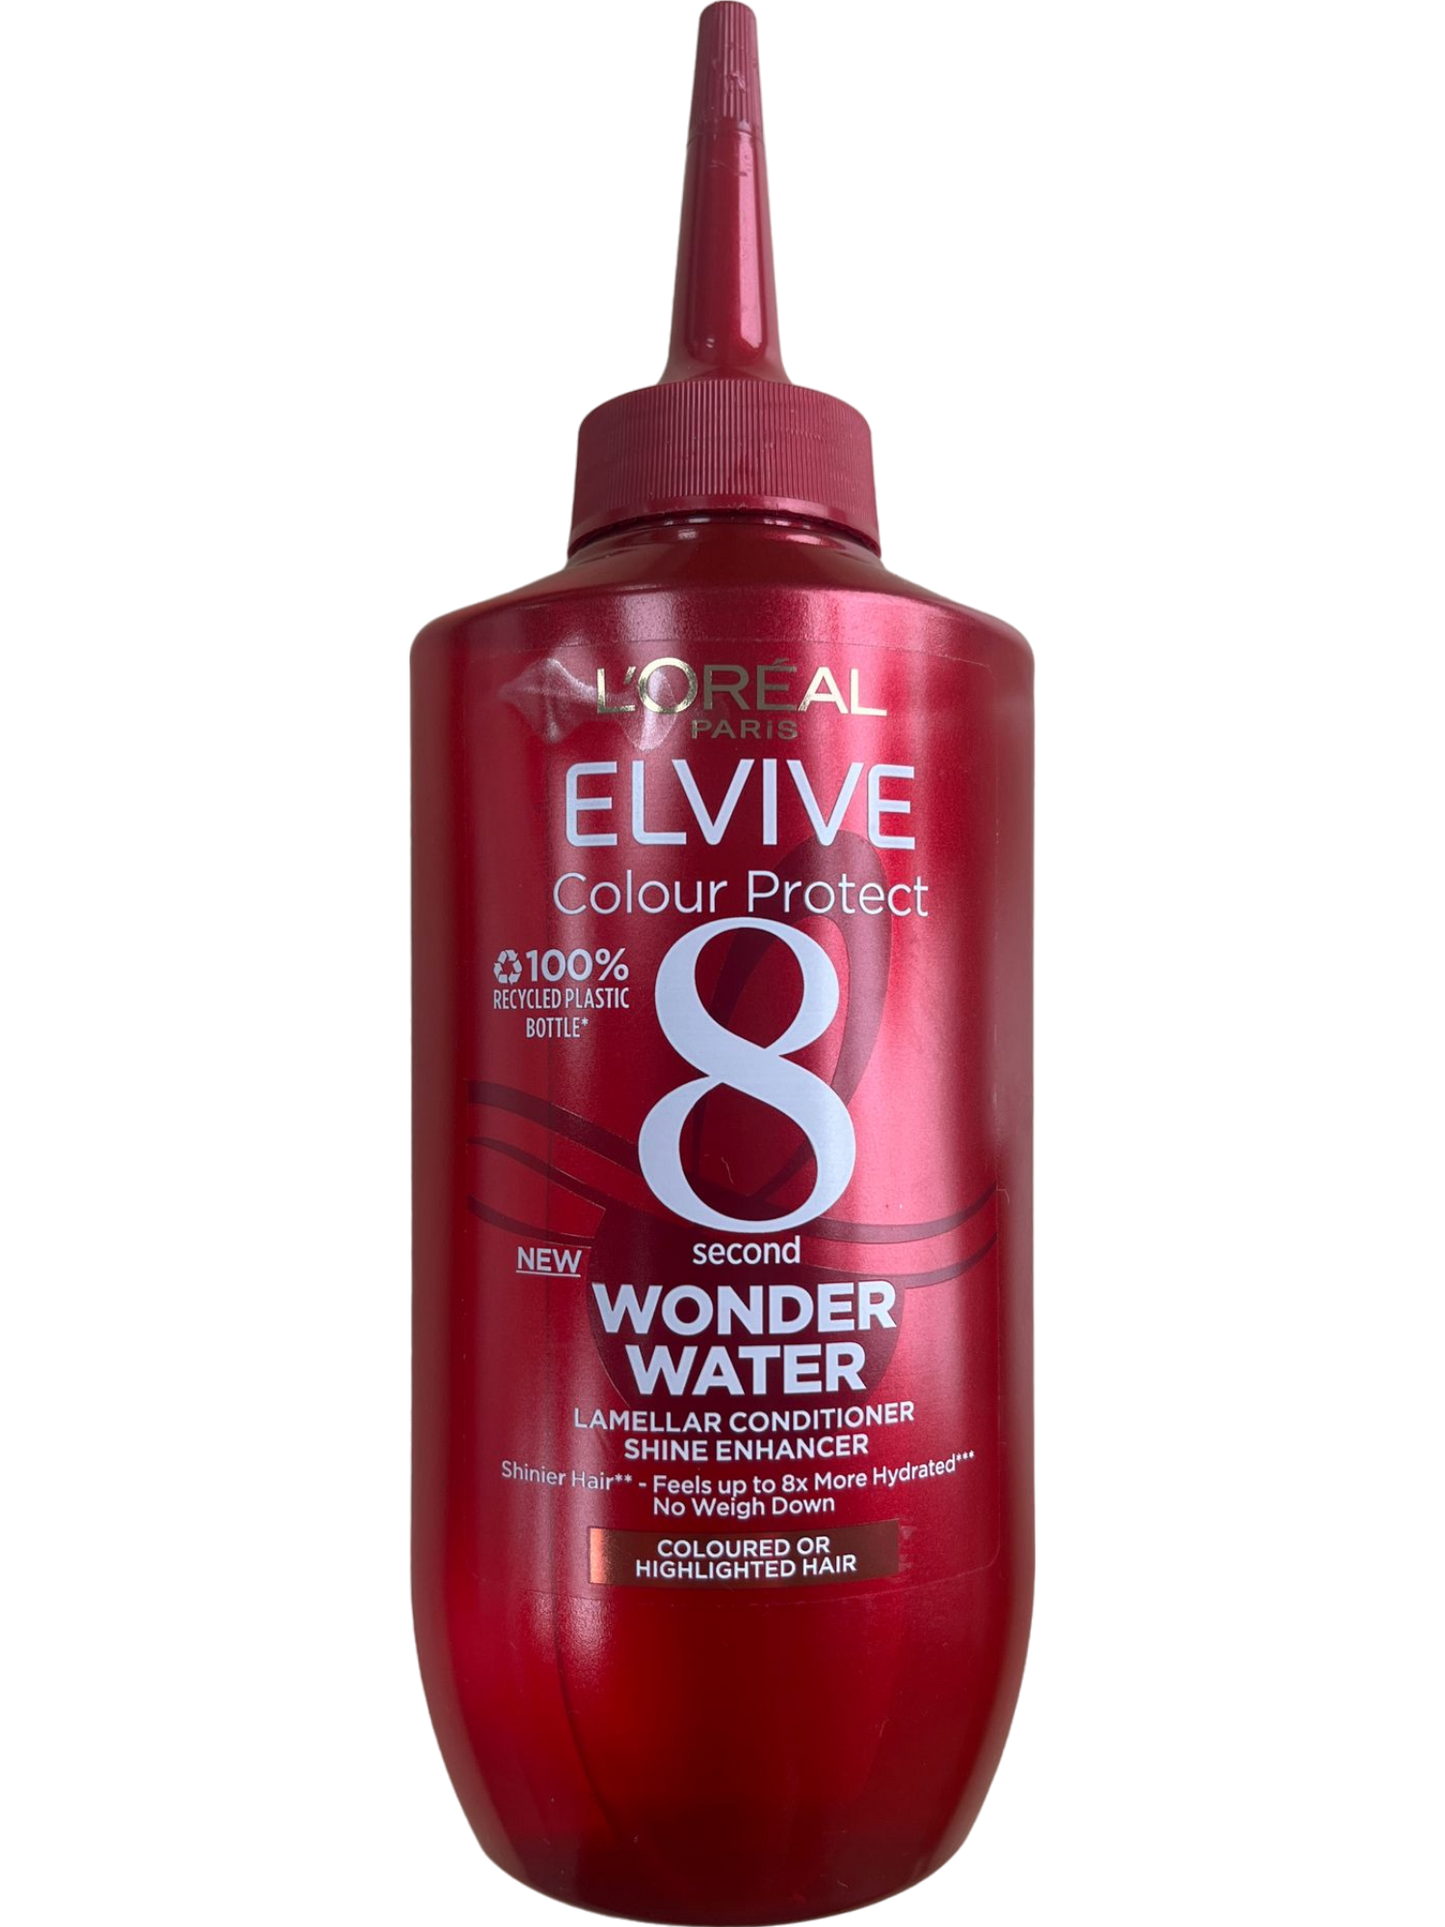 L'Oreal Elvive Colour Protect Wonder Water Conditioner Treatment 200ml